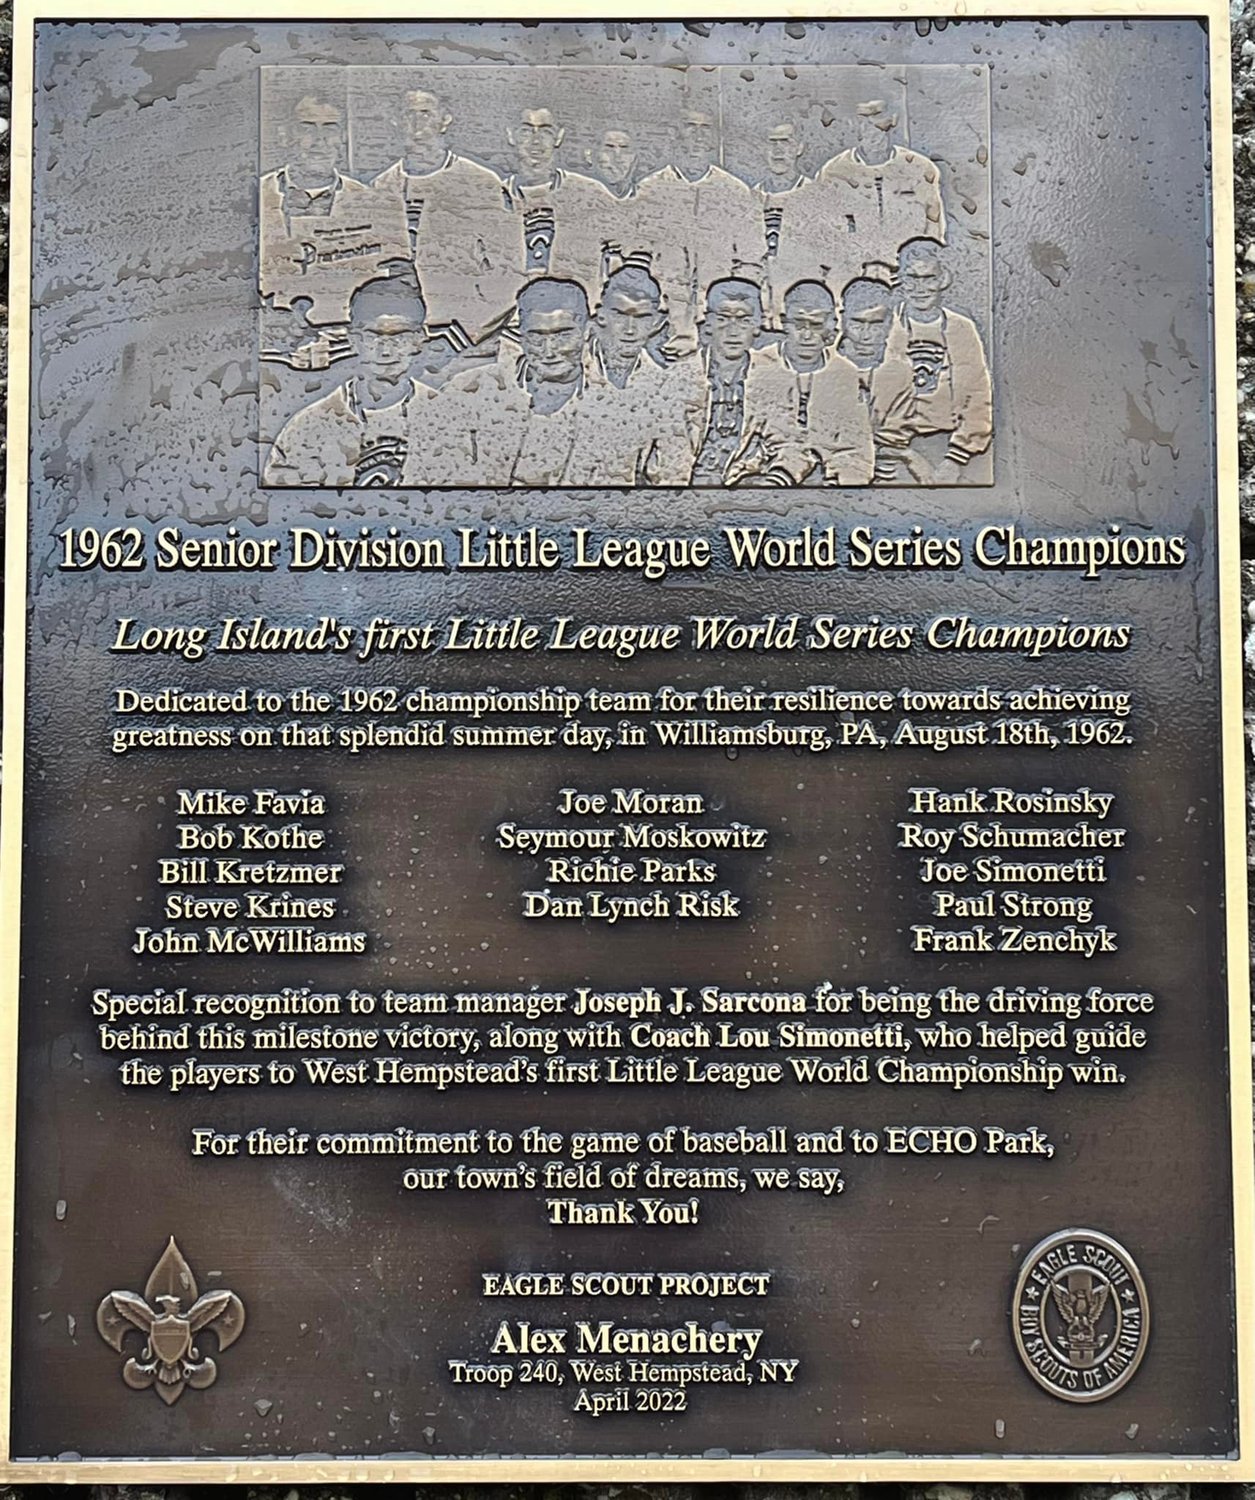 Eagle Scout hopeful Alex Menachery installed a plaque commemorating the 1962 victory of West Hempstead’s Senior League baseball team in Echo Park.